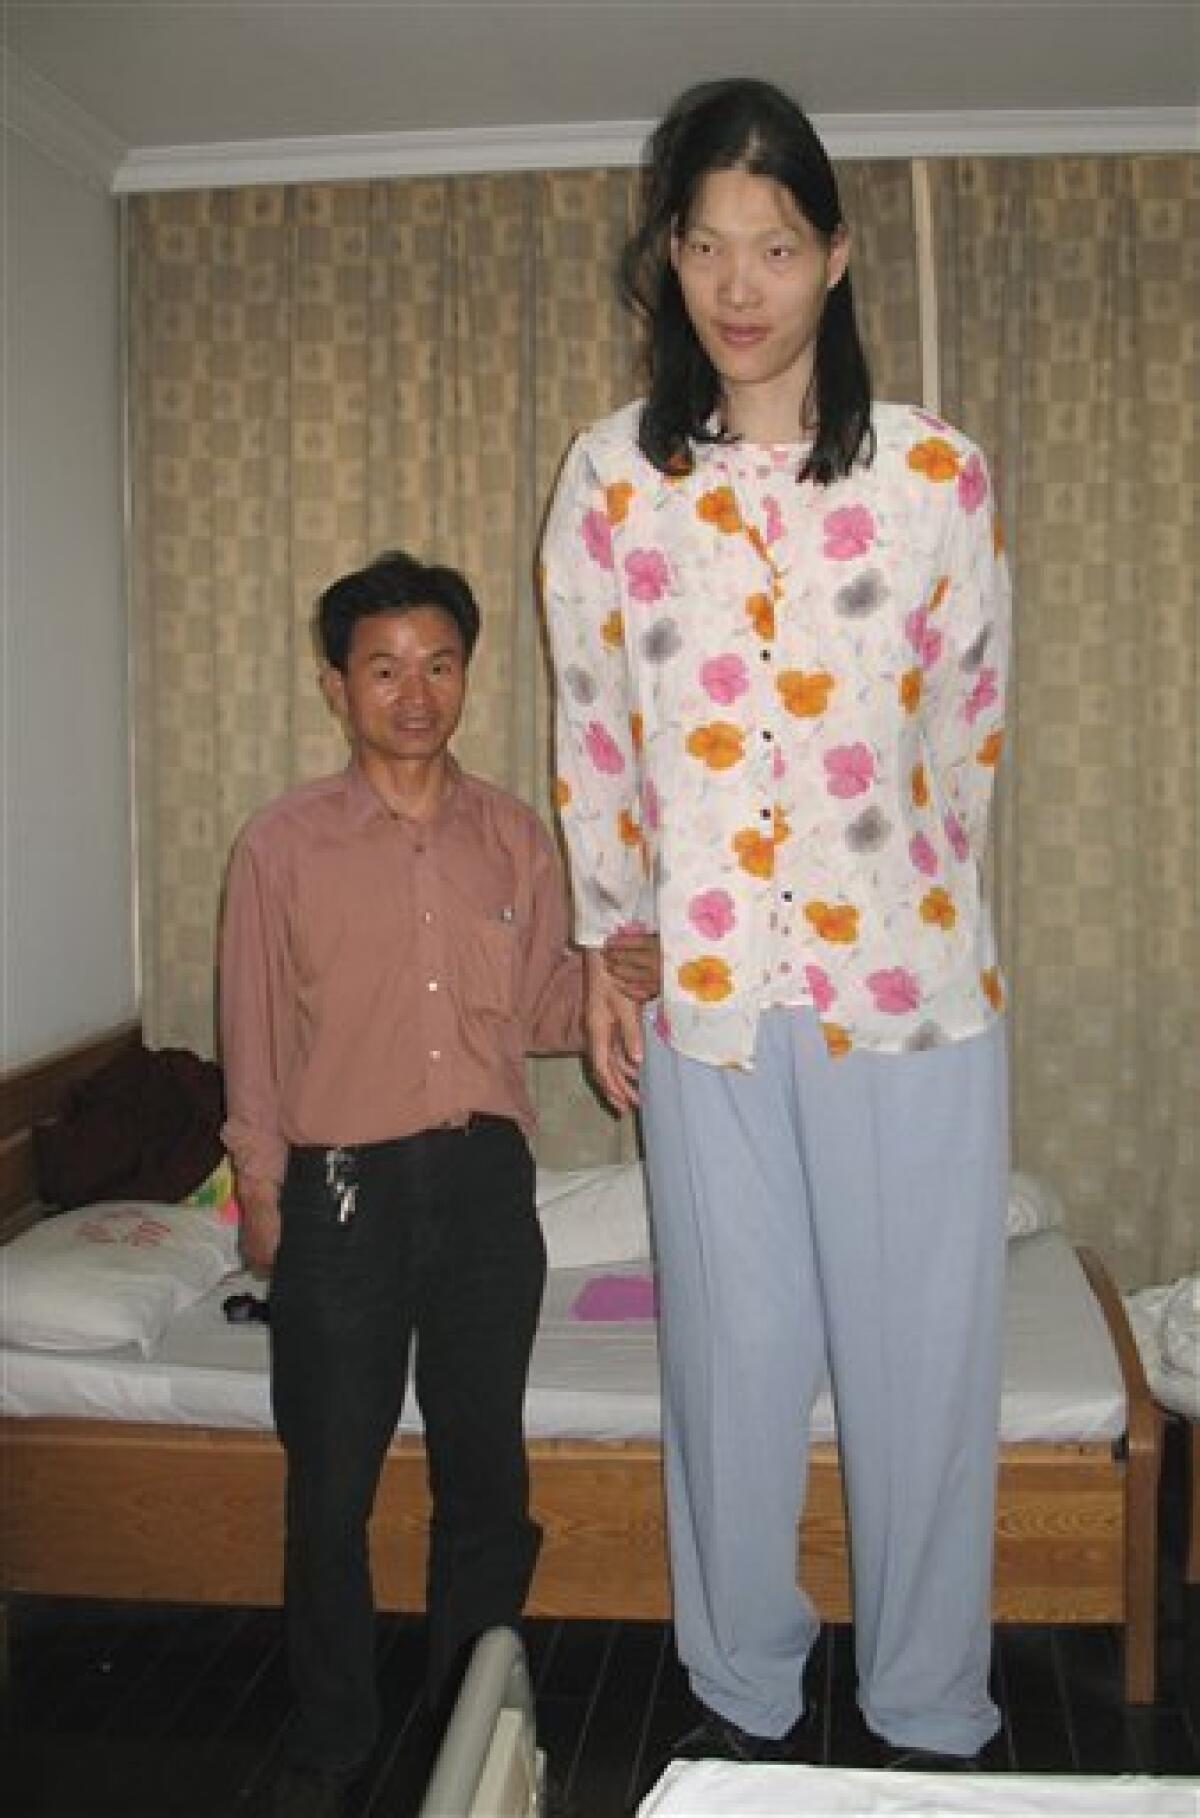 World's tallest woman dies at age 39